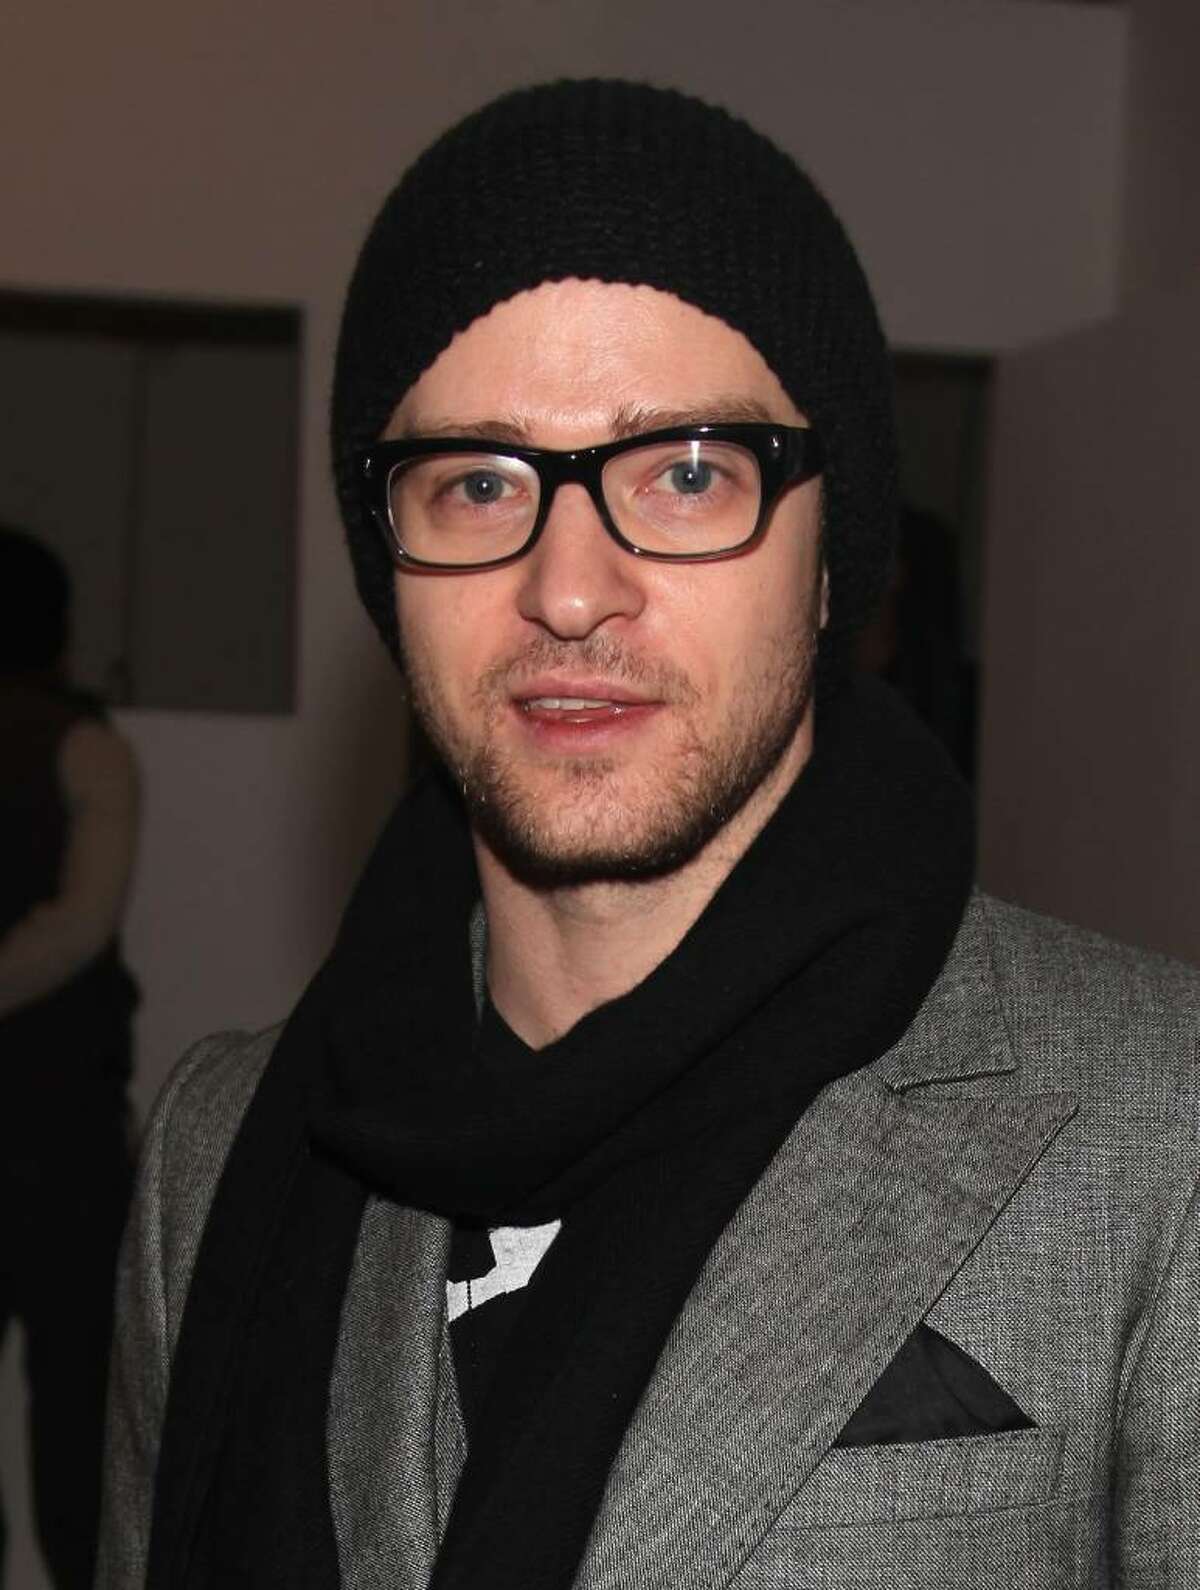 NEW YORK - FEBRUARY 18: Justin Timberlake attends the Paris68 Fall 2010 Fashion Show during Mercedes-Benz Fashion Week at Milk Studios on February 18, 2010 in New York, New York. (Photo by Astrid Stawiarz/Getty Images) *** Local Caption *** Justin Timberlake